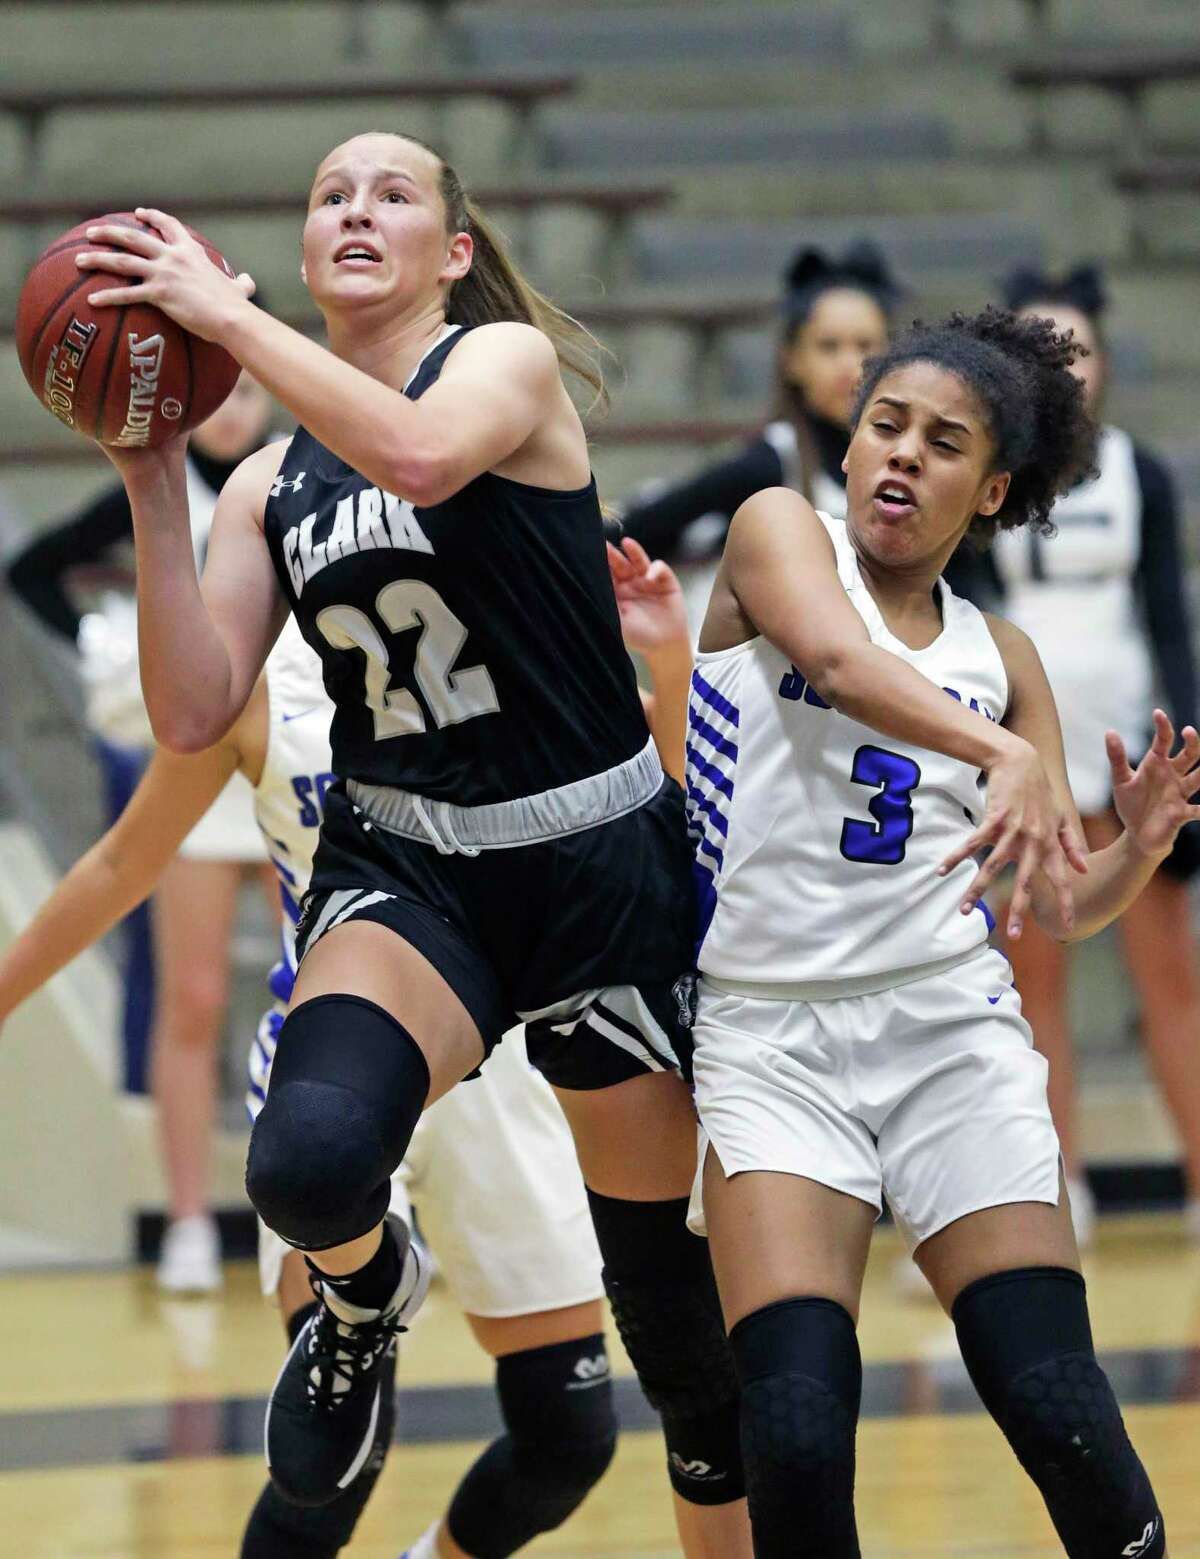 Hailey Adams breaks through a double team for the Cougars as South San plays Clark in first round girls basketball playoffs at Alamo Convocation Center on Feb. 18, 2020.